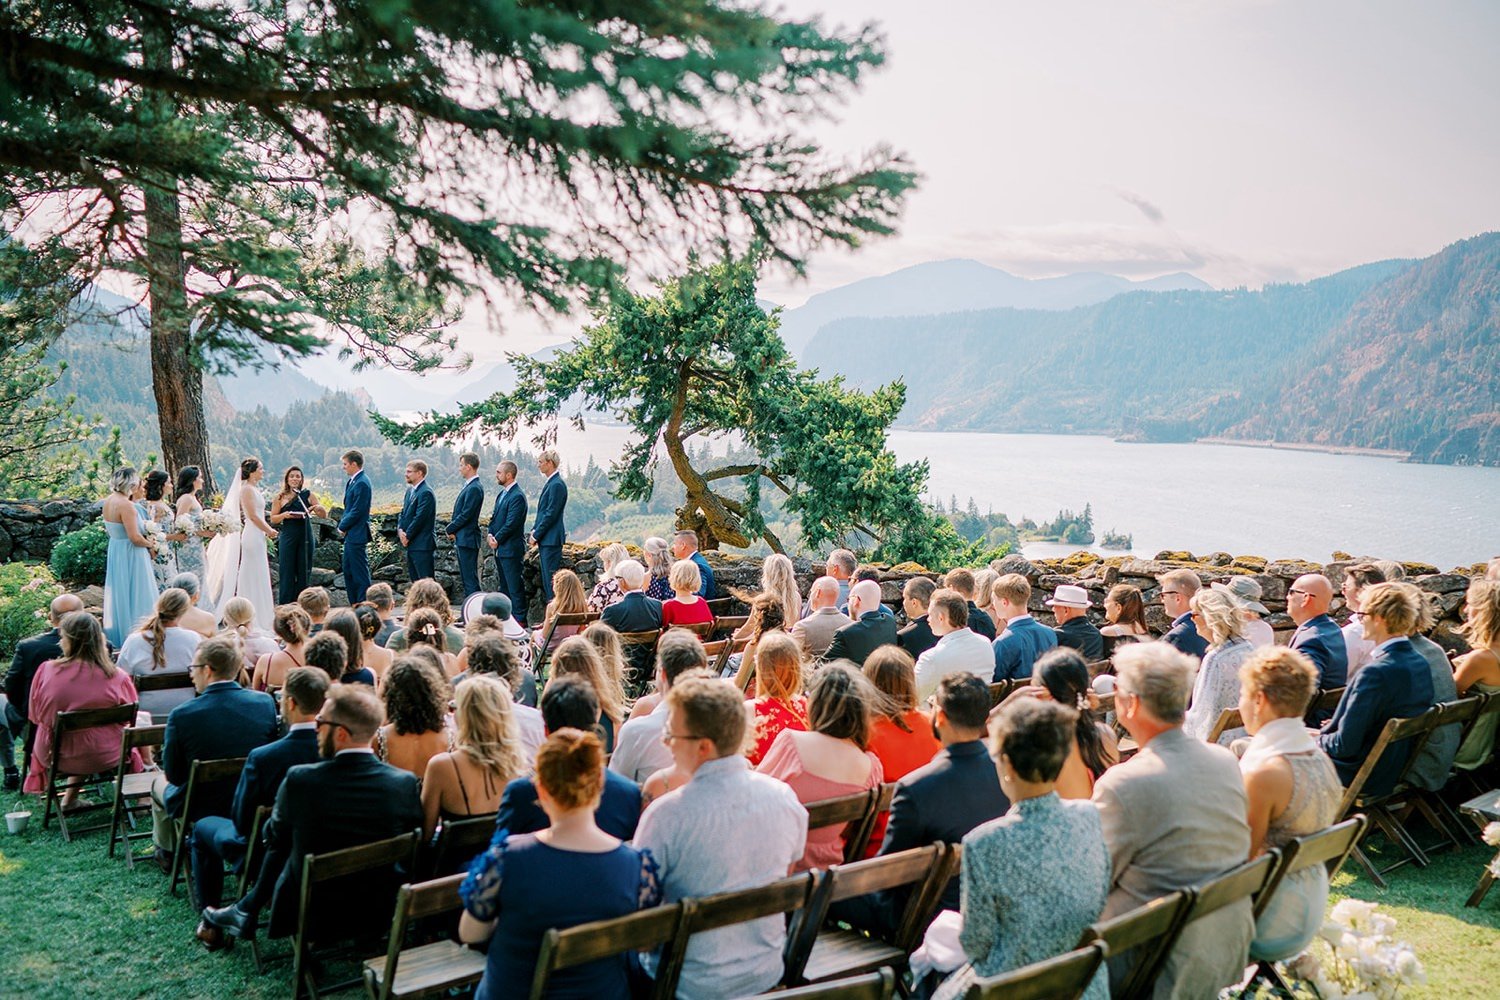 013_epic landscape views from a wedding ceremony at Griffin House in Hood River, Oregon.jpg